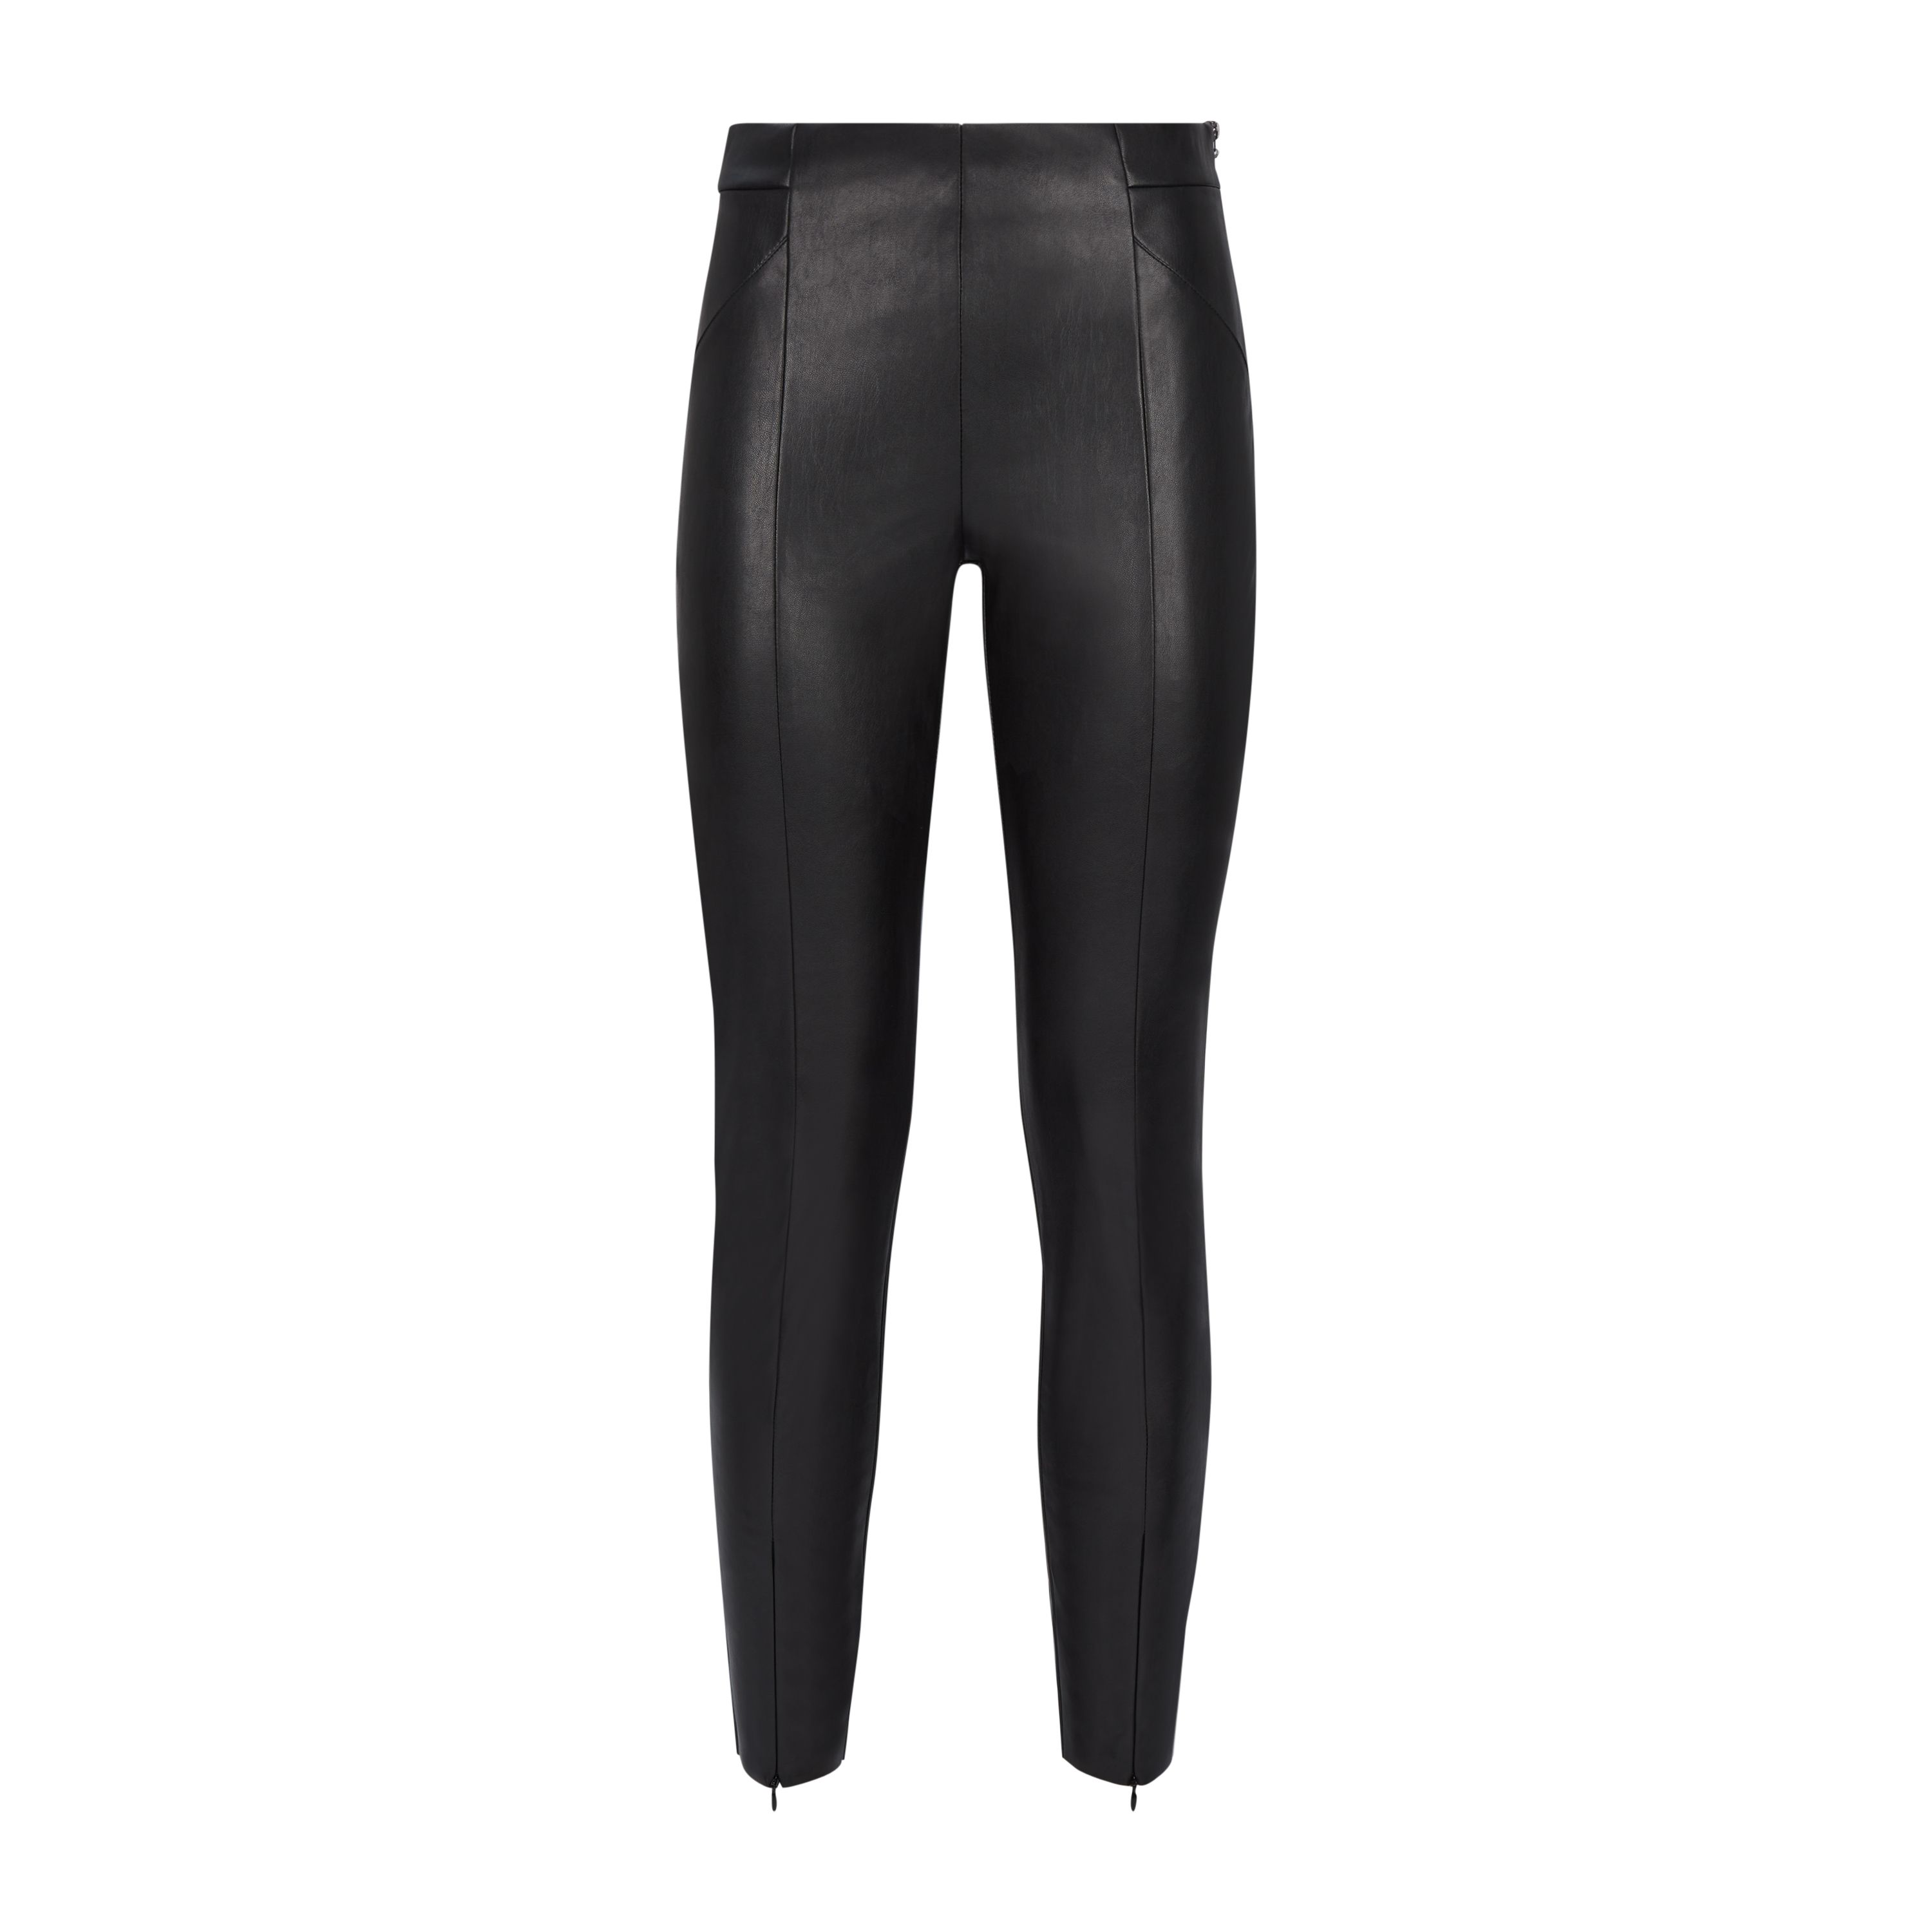 Cut to a slim line silhouette, elasticated waistband and finished with a ankle zip opening. These skinny fit leggings will be your go-to all season long. Wear with a knitted jumper and chunky boots to complete the look.